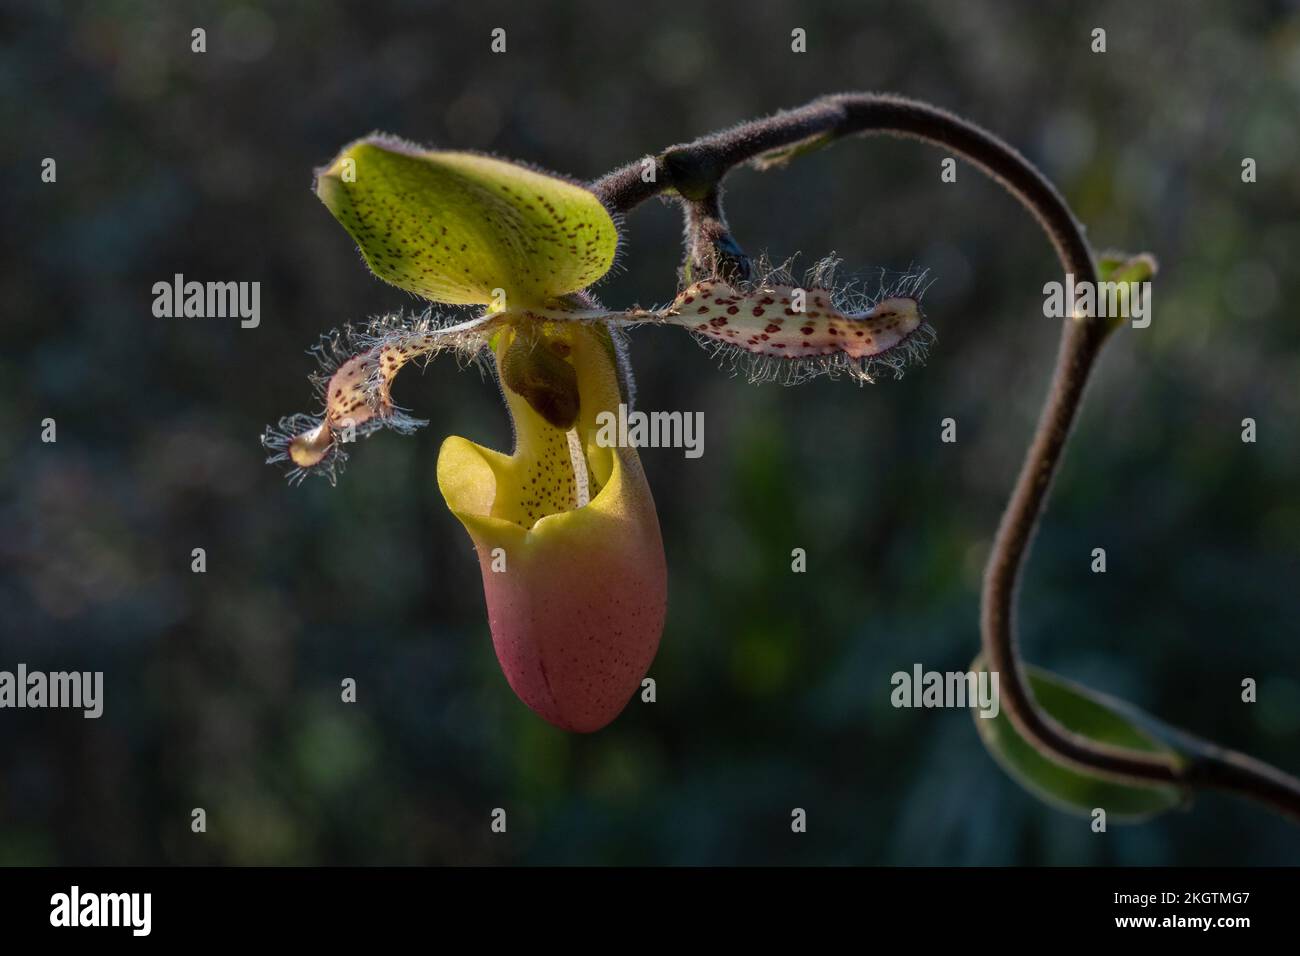 Closeup view of yellow green and purple pink lady slipper orchid species paphiopedilum moquetteanum flower in sunlight isolated on natural background Stock Photo